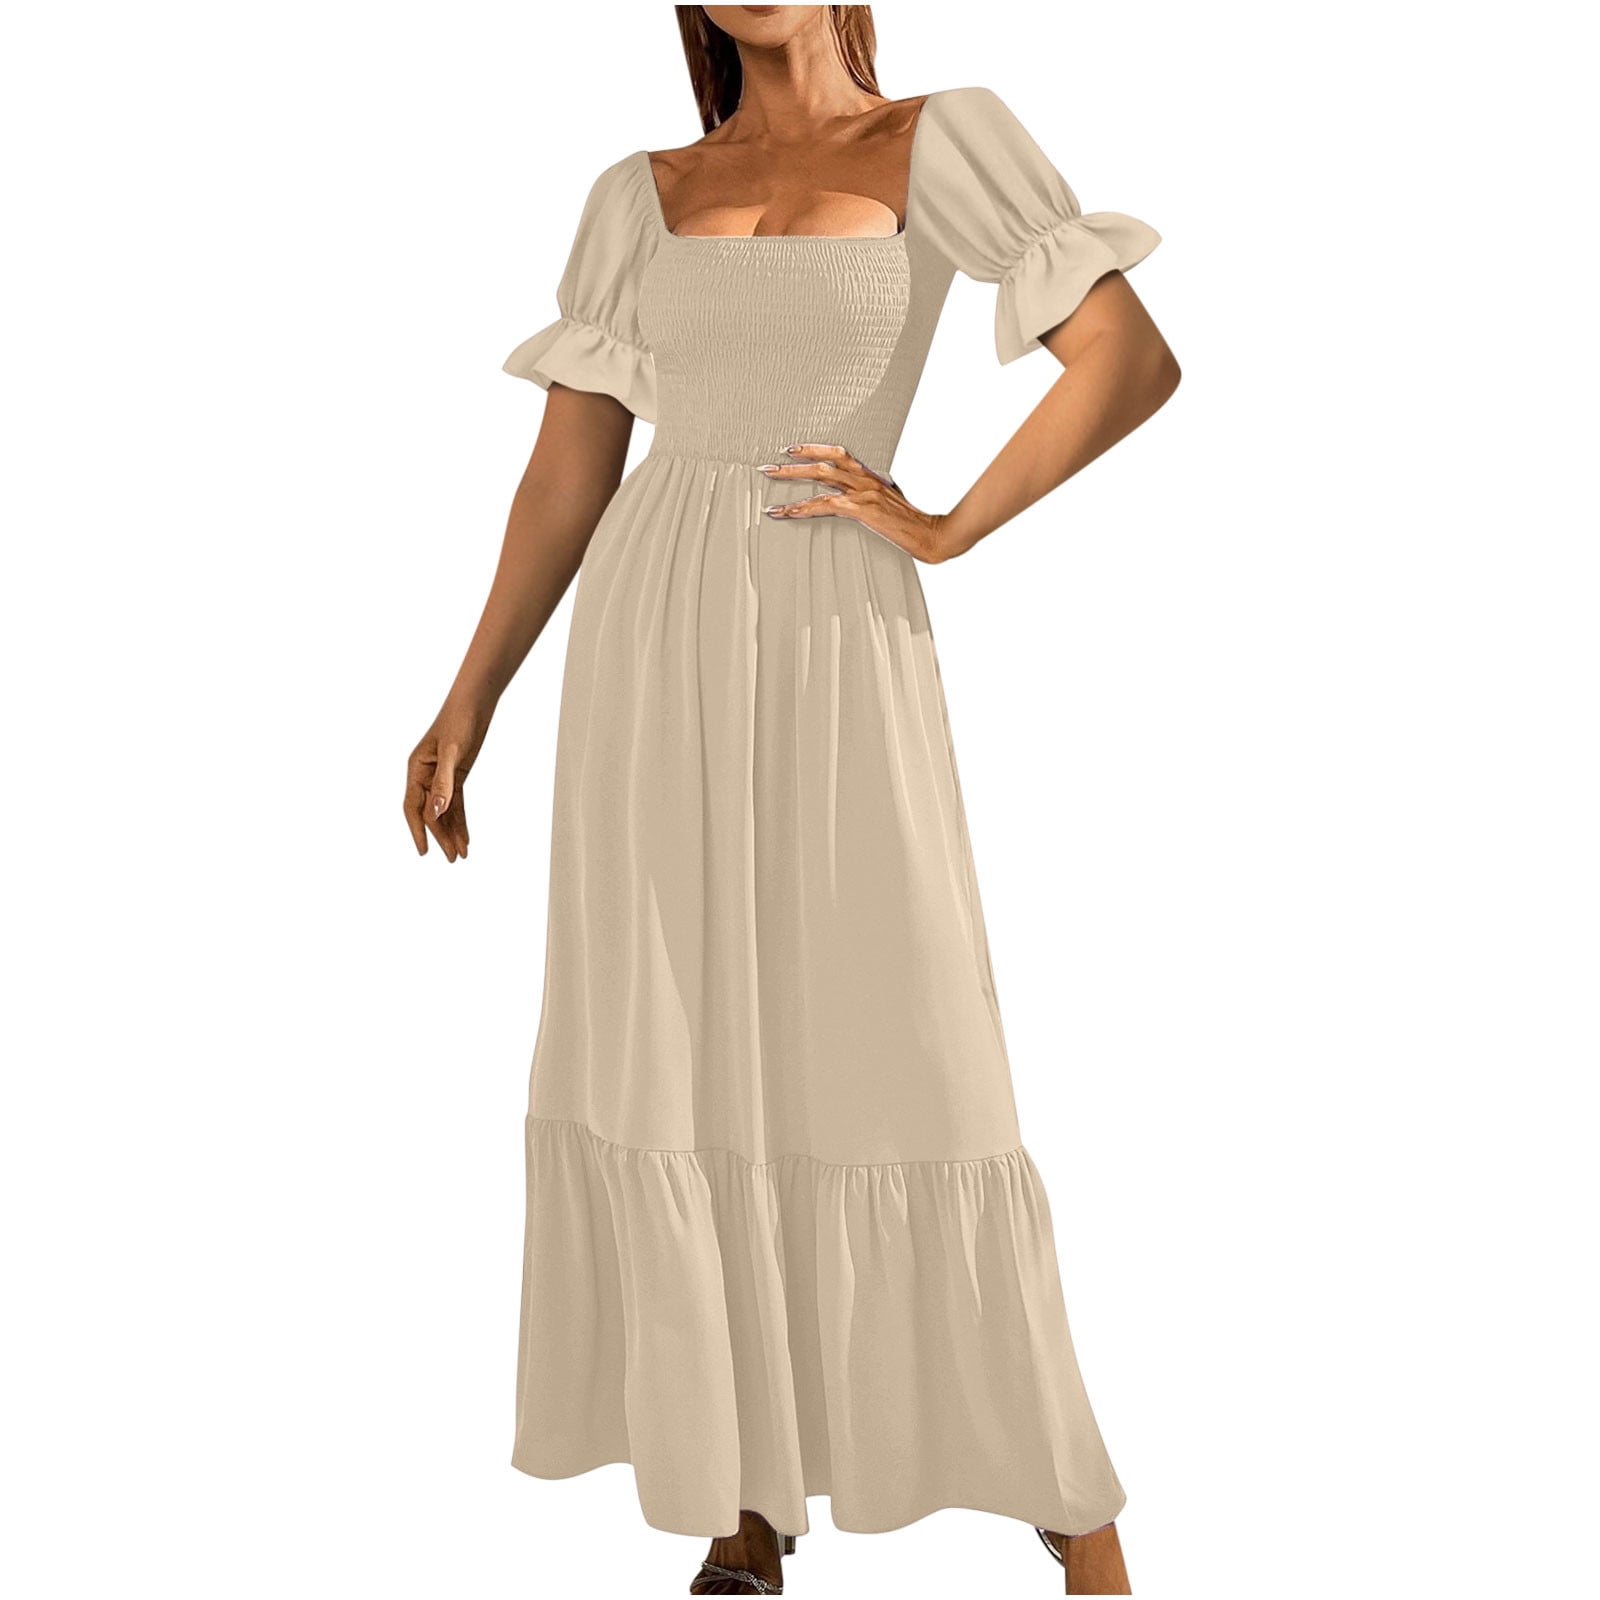 fvwitlyh Sweater Dresses for Women 2022 Floor-Length Off Shoulder Ruffles  Stringy Selvedge Bodycon Party Evening Maxi Dress 